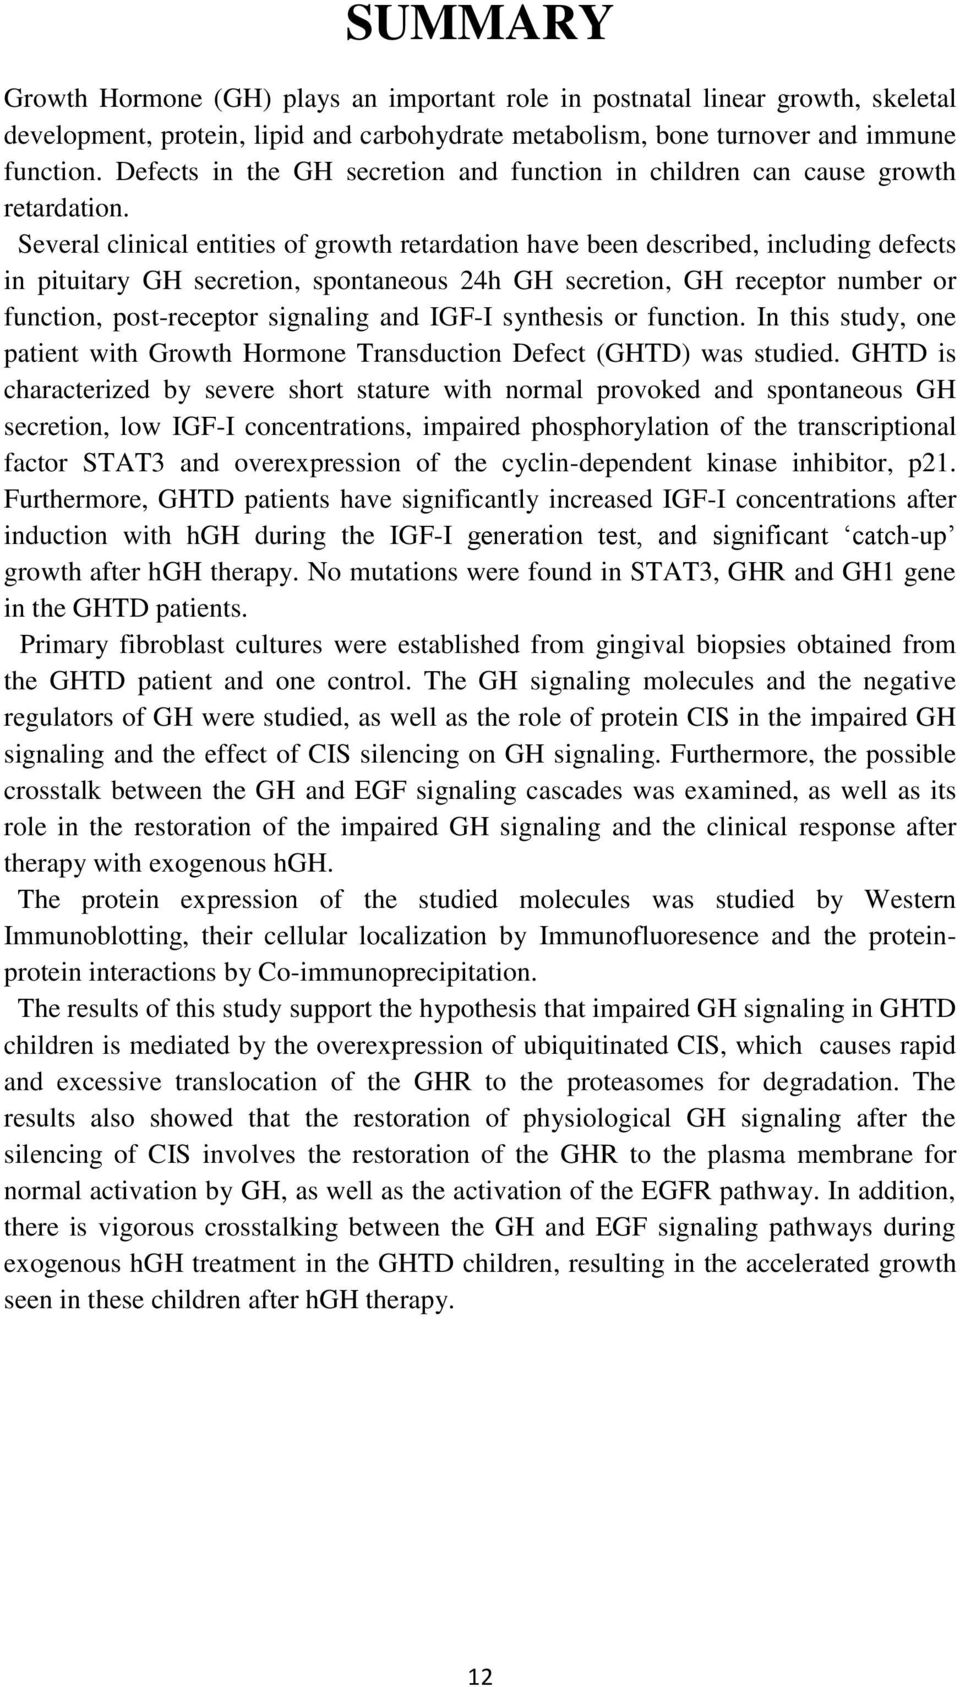 Several clinical entities of growth retardation have been described, including defects in pituitary GH secretion, spontaneous 24h GH secretion, GH receptor number or function, post-receptor signaling